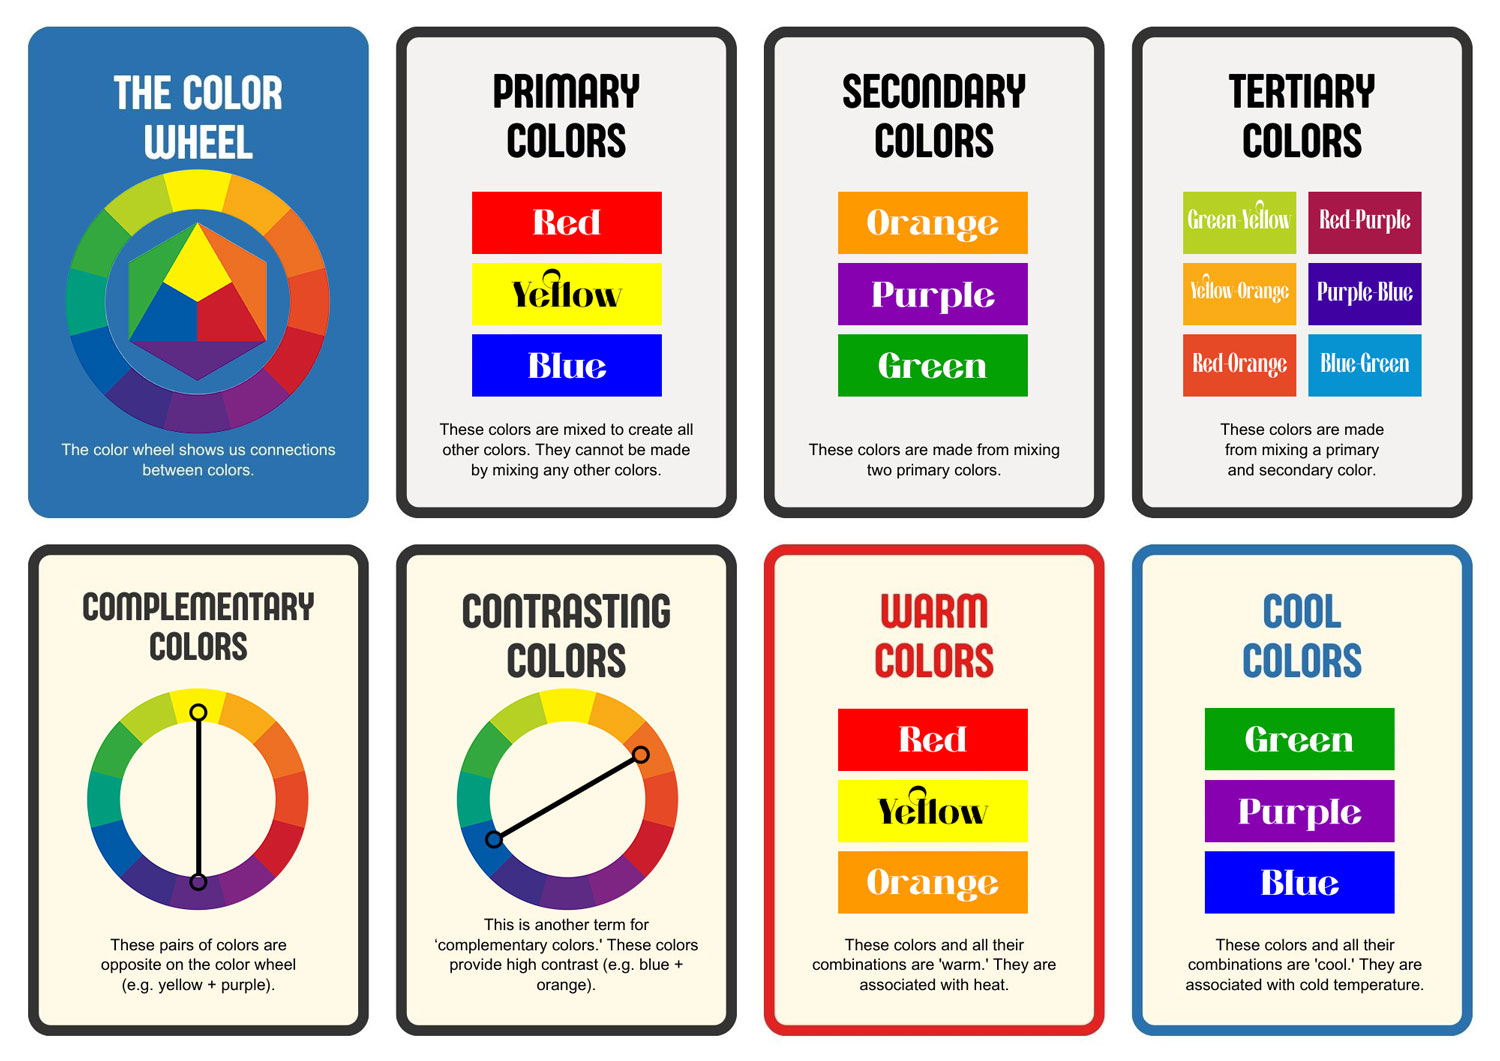 Educational color theory cards displaying the color wheel, primary, secondary, tertiary, complementary, contrasting, warm, and cool colors.